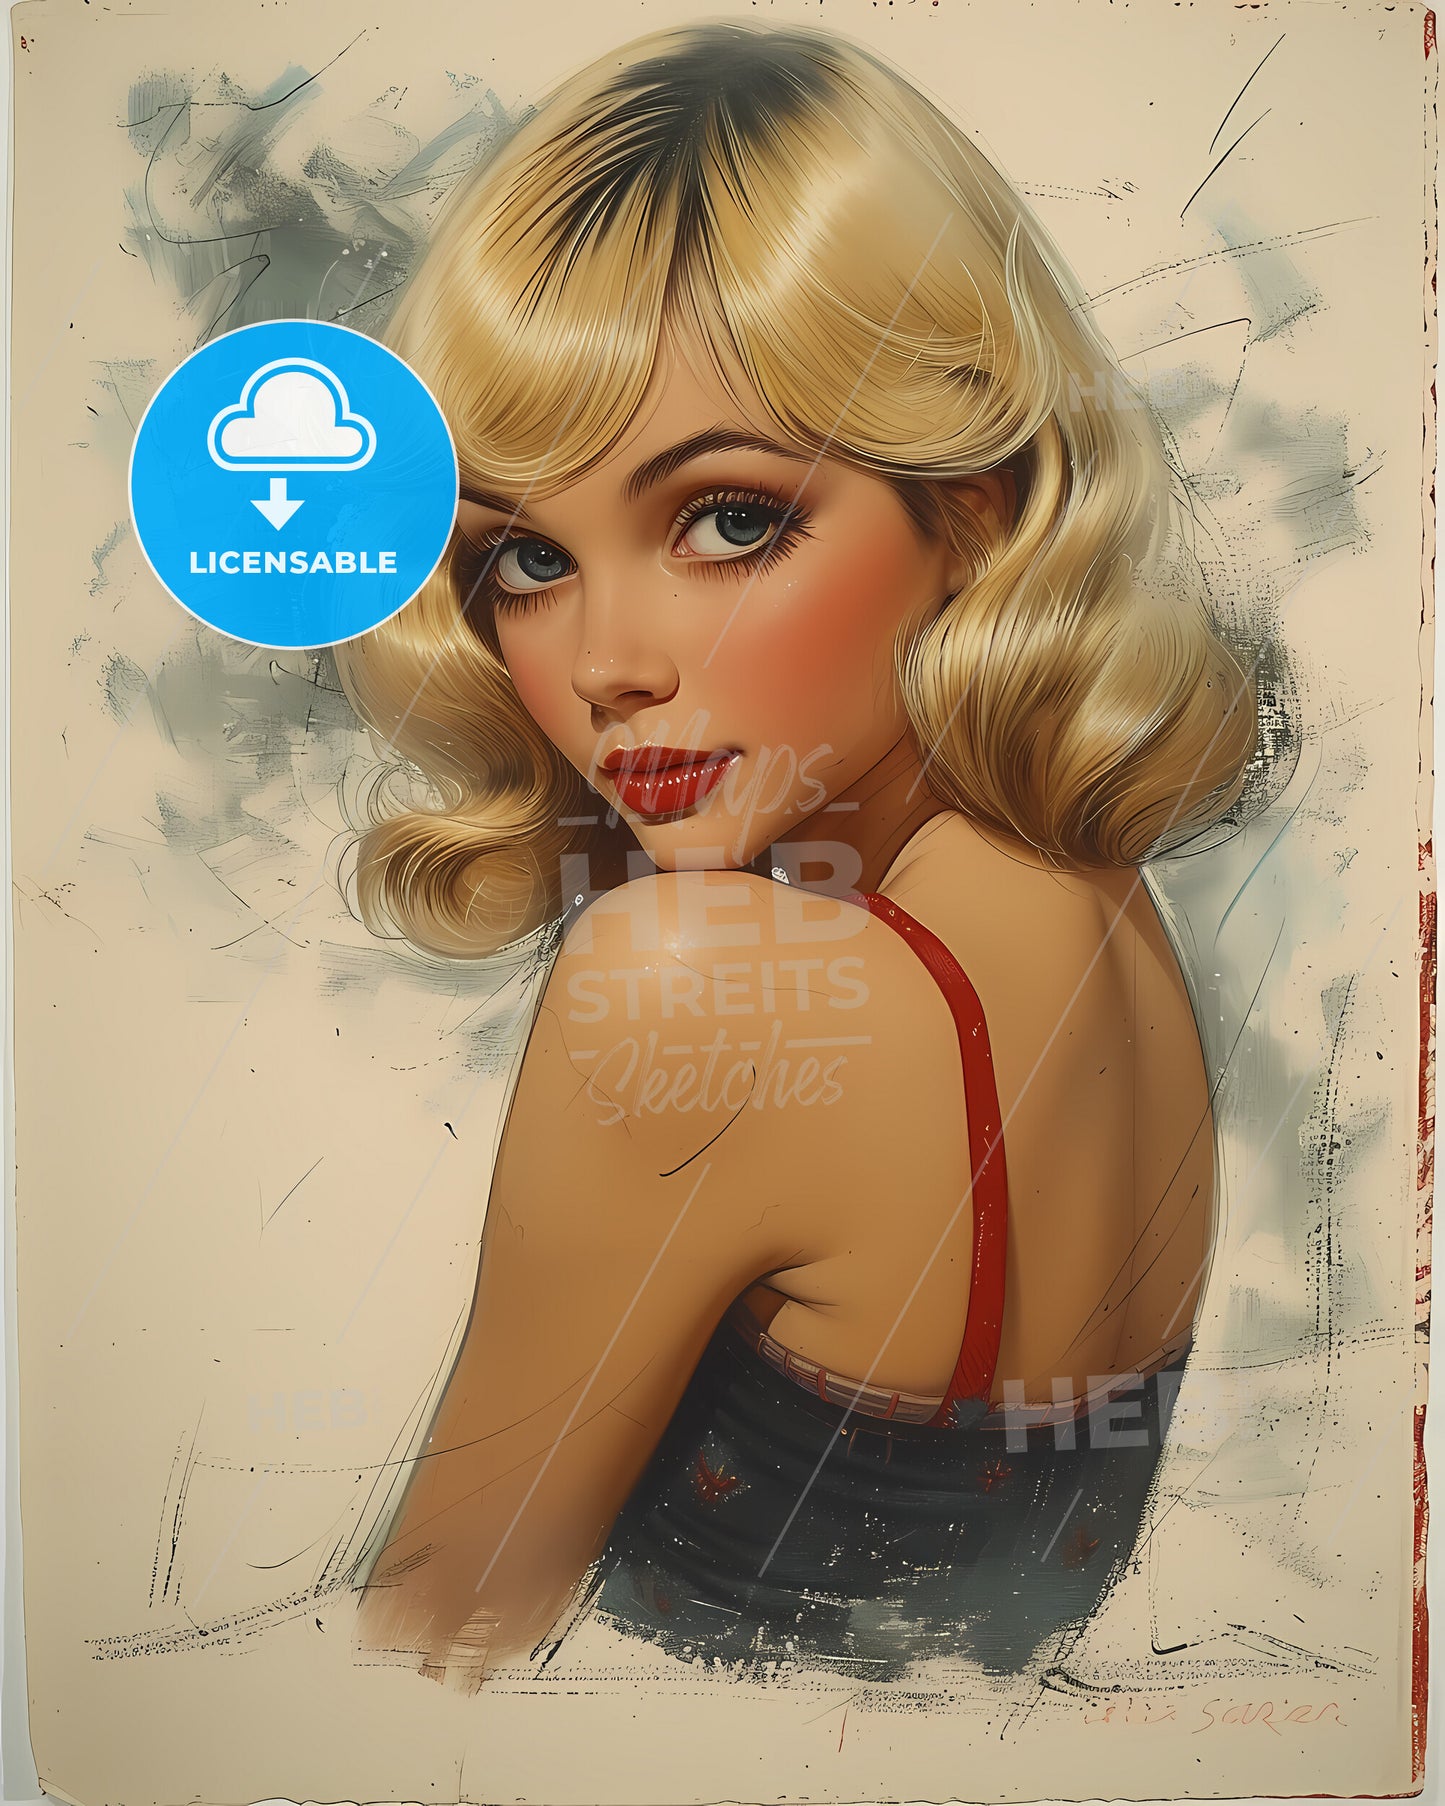 pin-up, curvy blonde model, Vintage art illustration, a woman with blonde hair and red lipstick